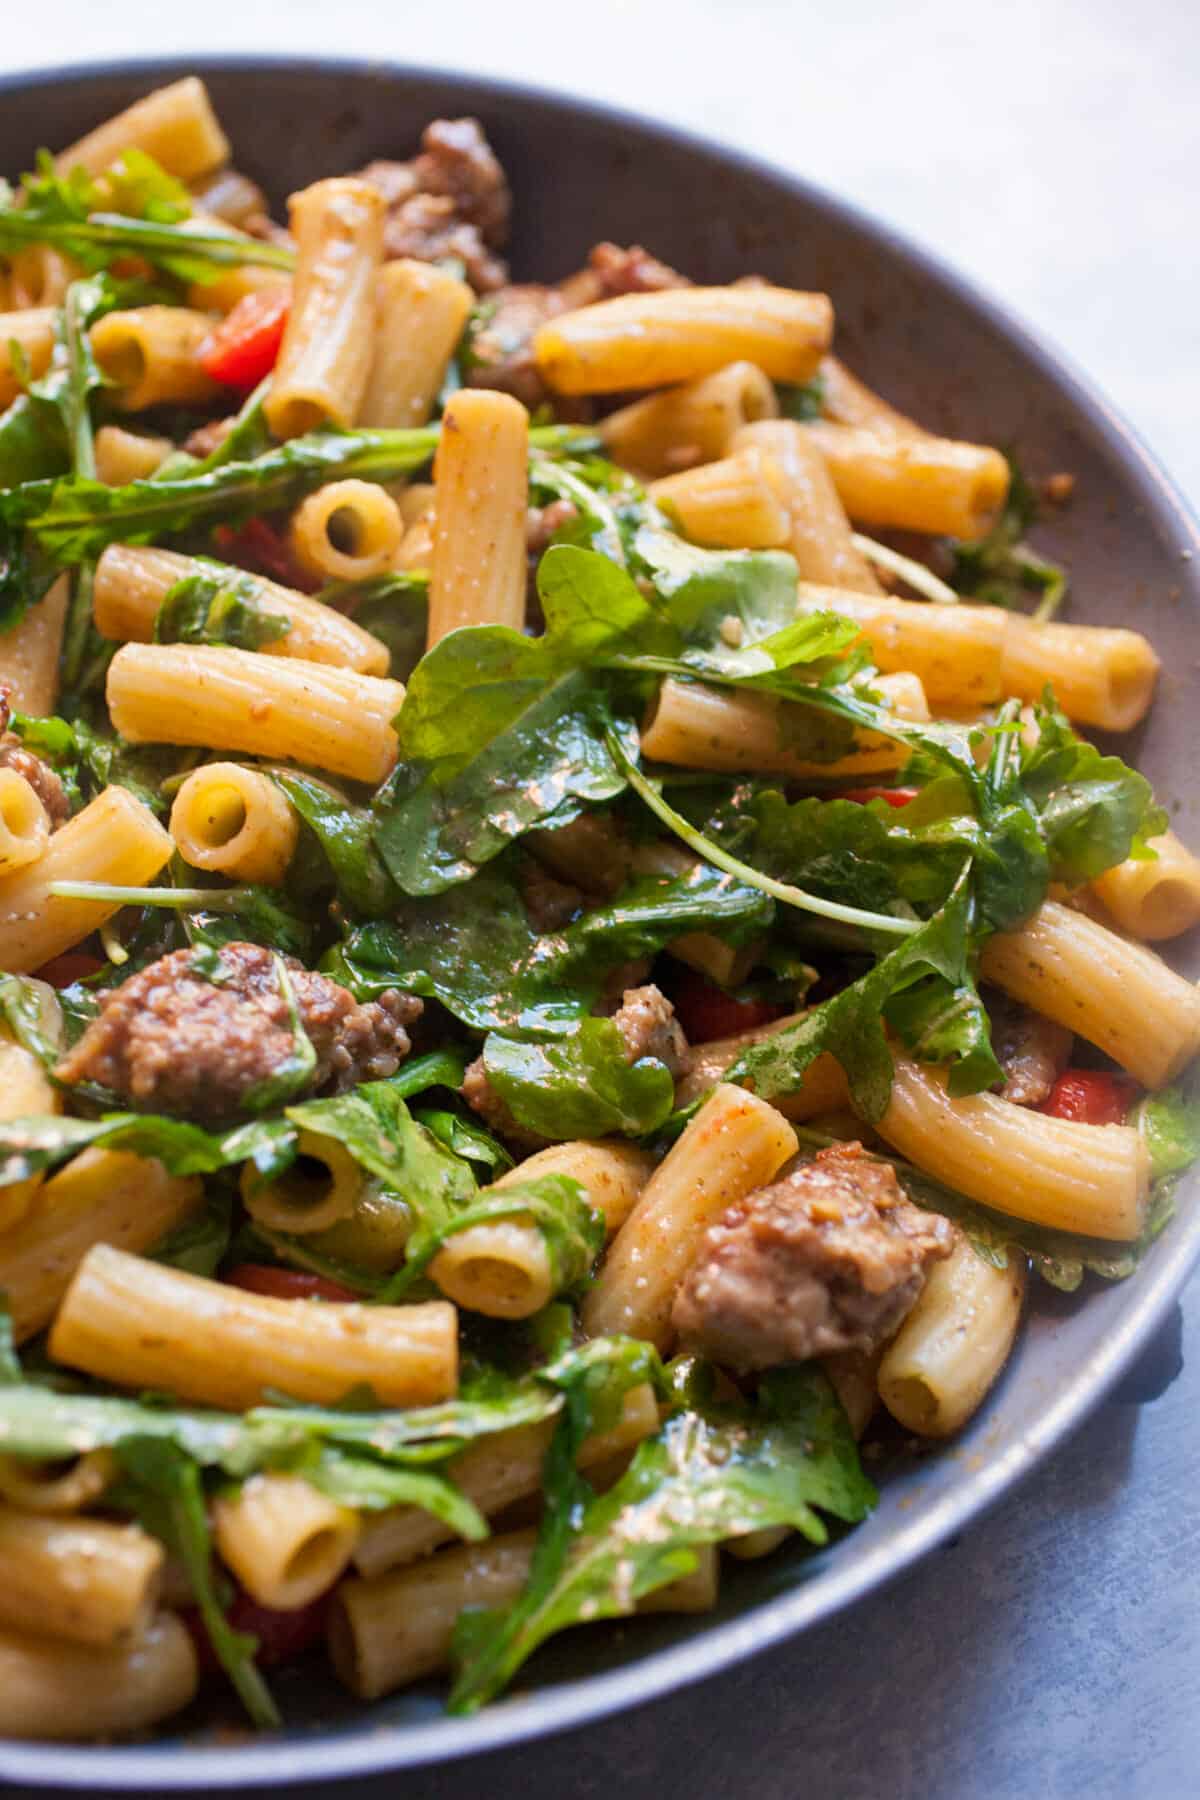 Easy Pesto Pasta with Sausage: This pasta dish is perfect comfort food. Simple flavors with sweet Italian sausage, arugula, and grape tomatoes, tossed with pasta and pesto. One of my new favorites! | macheesmo.com